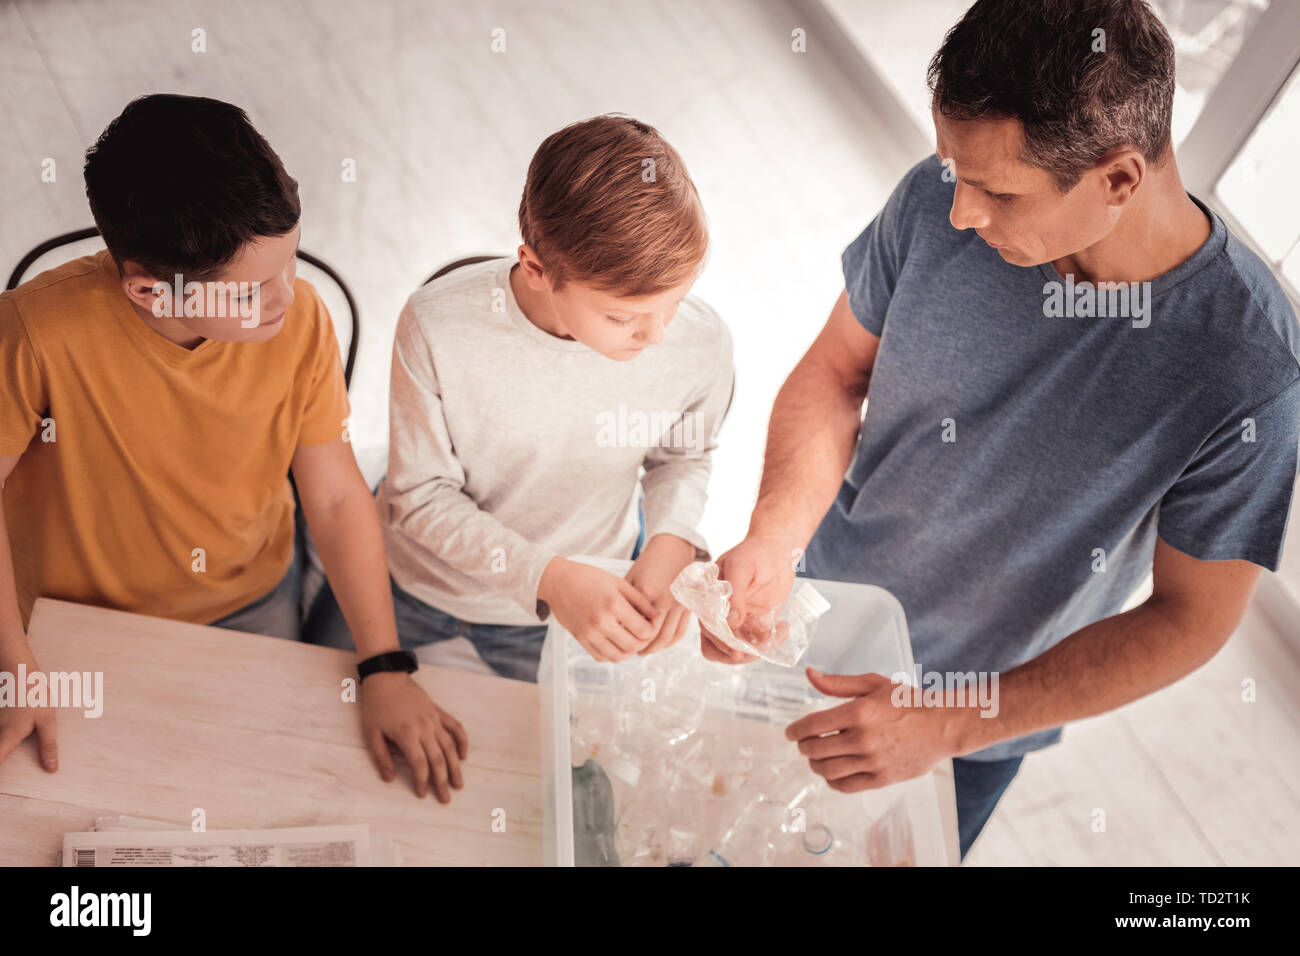 Caring father speaking with his children about plastic Stock Photo